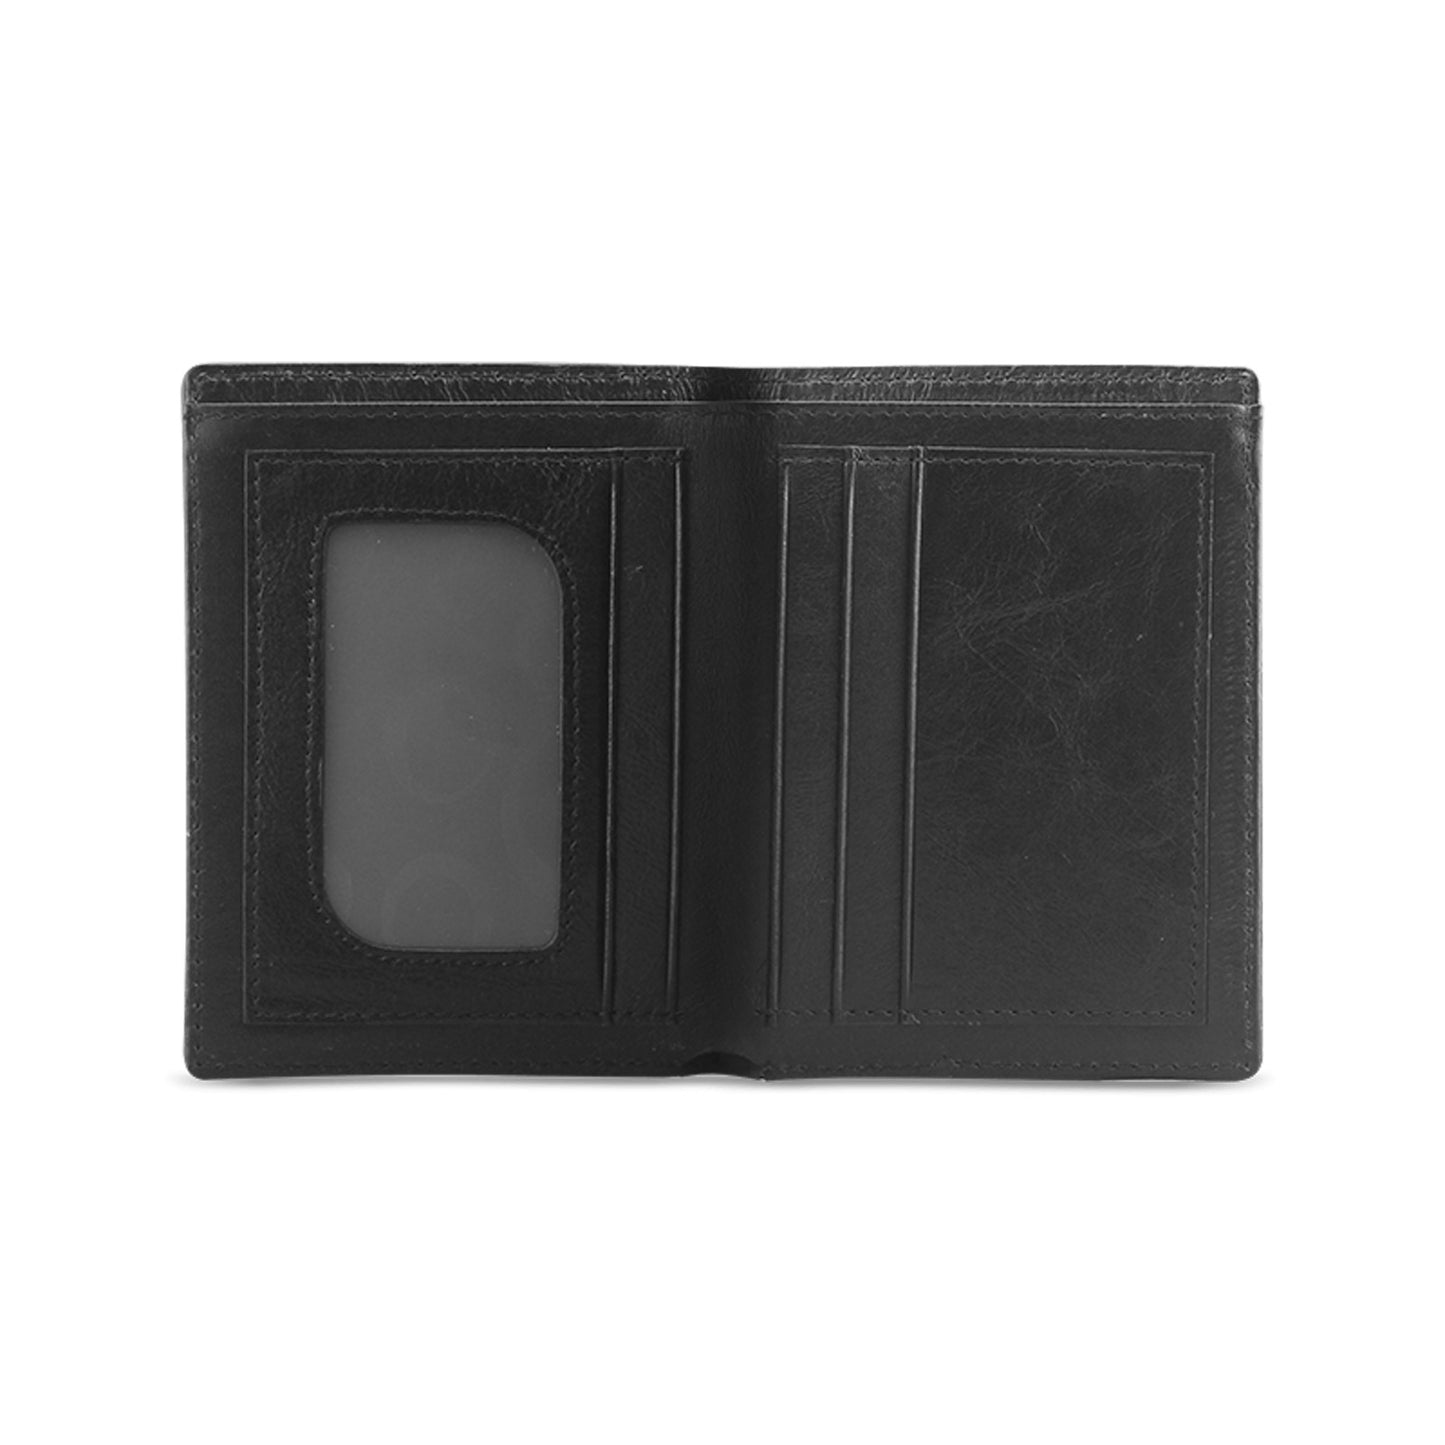 Living With The Land Men's Leather Wallet